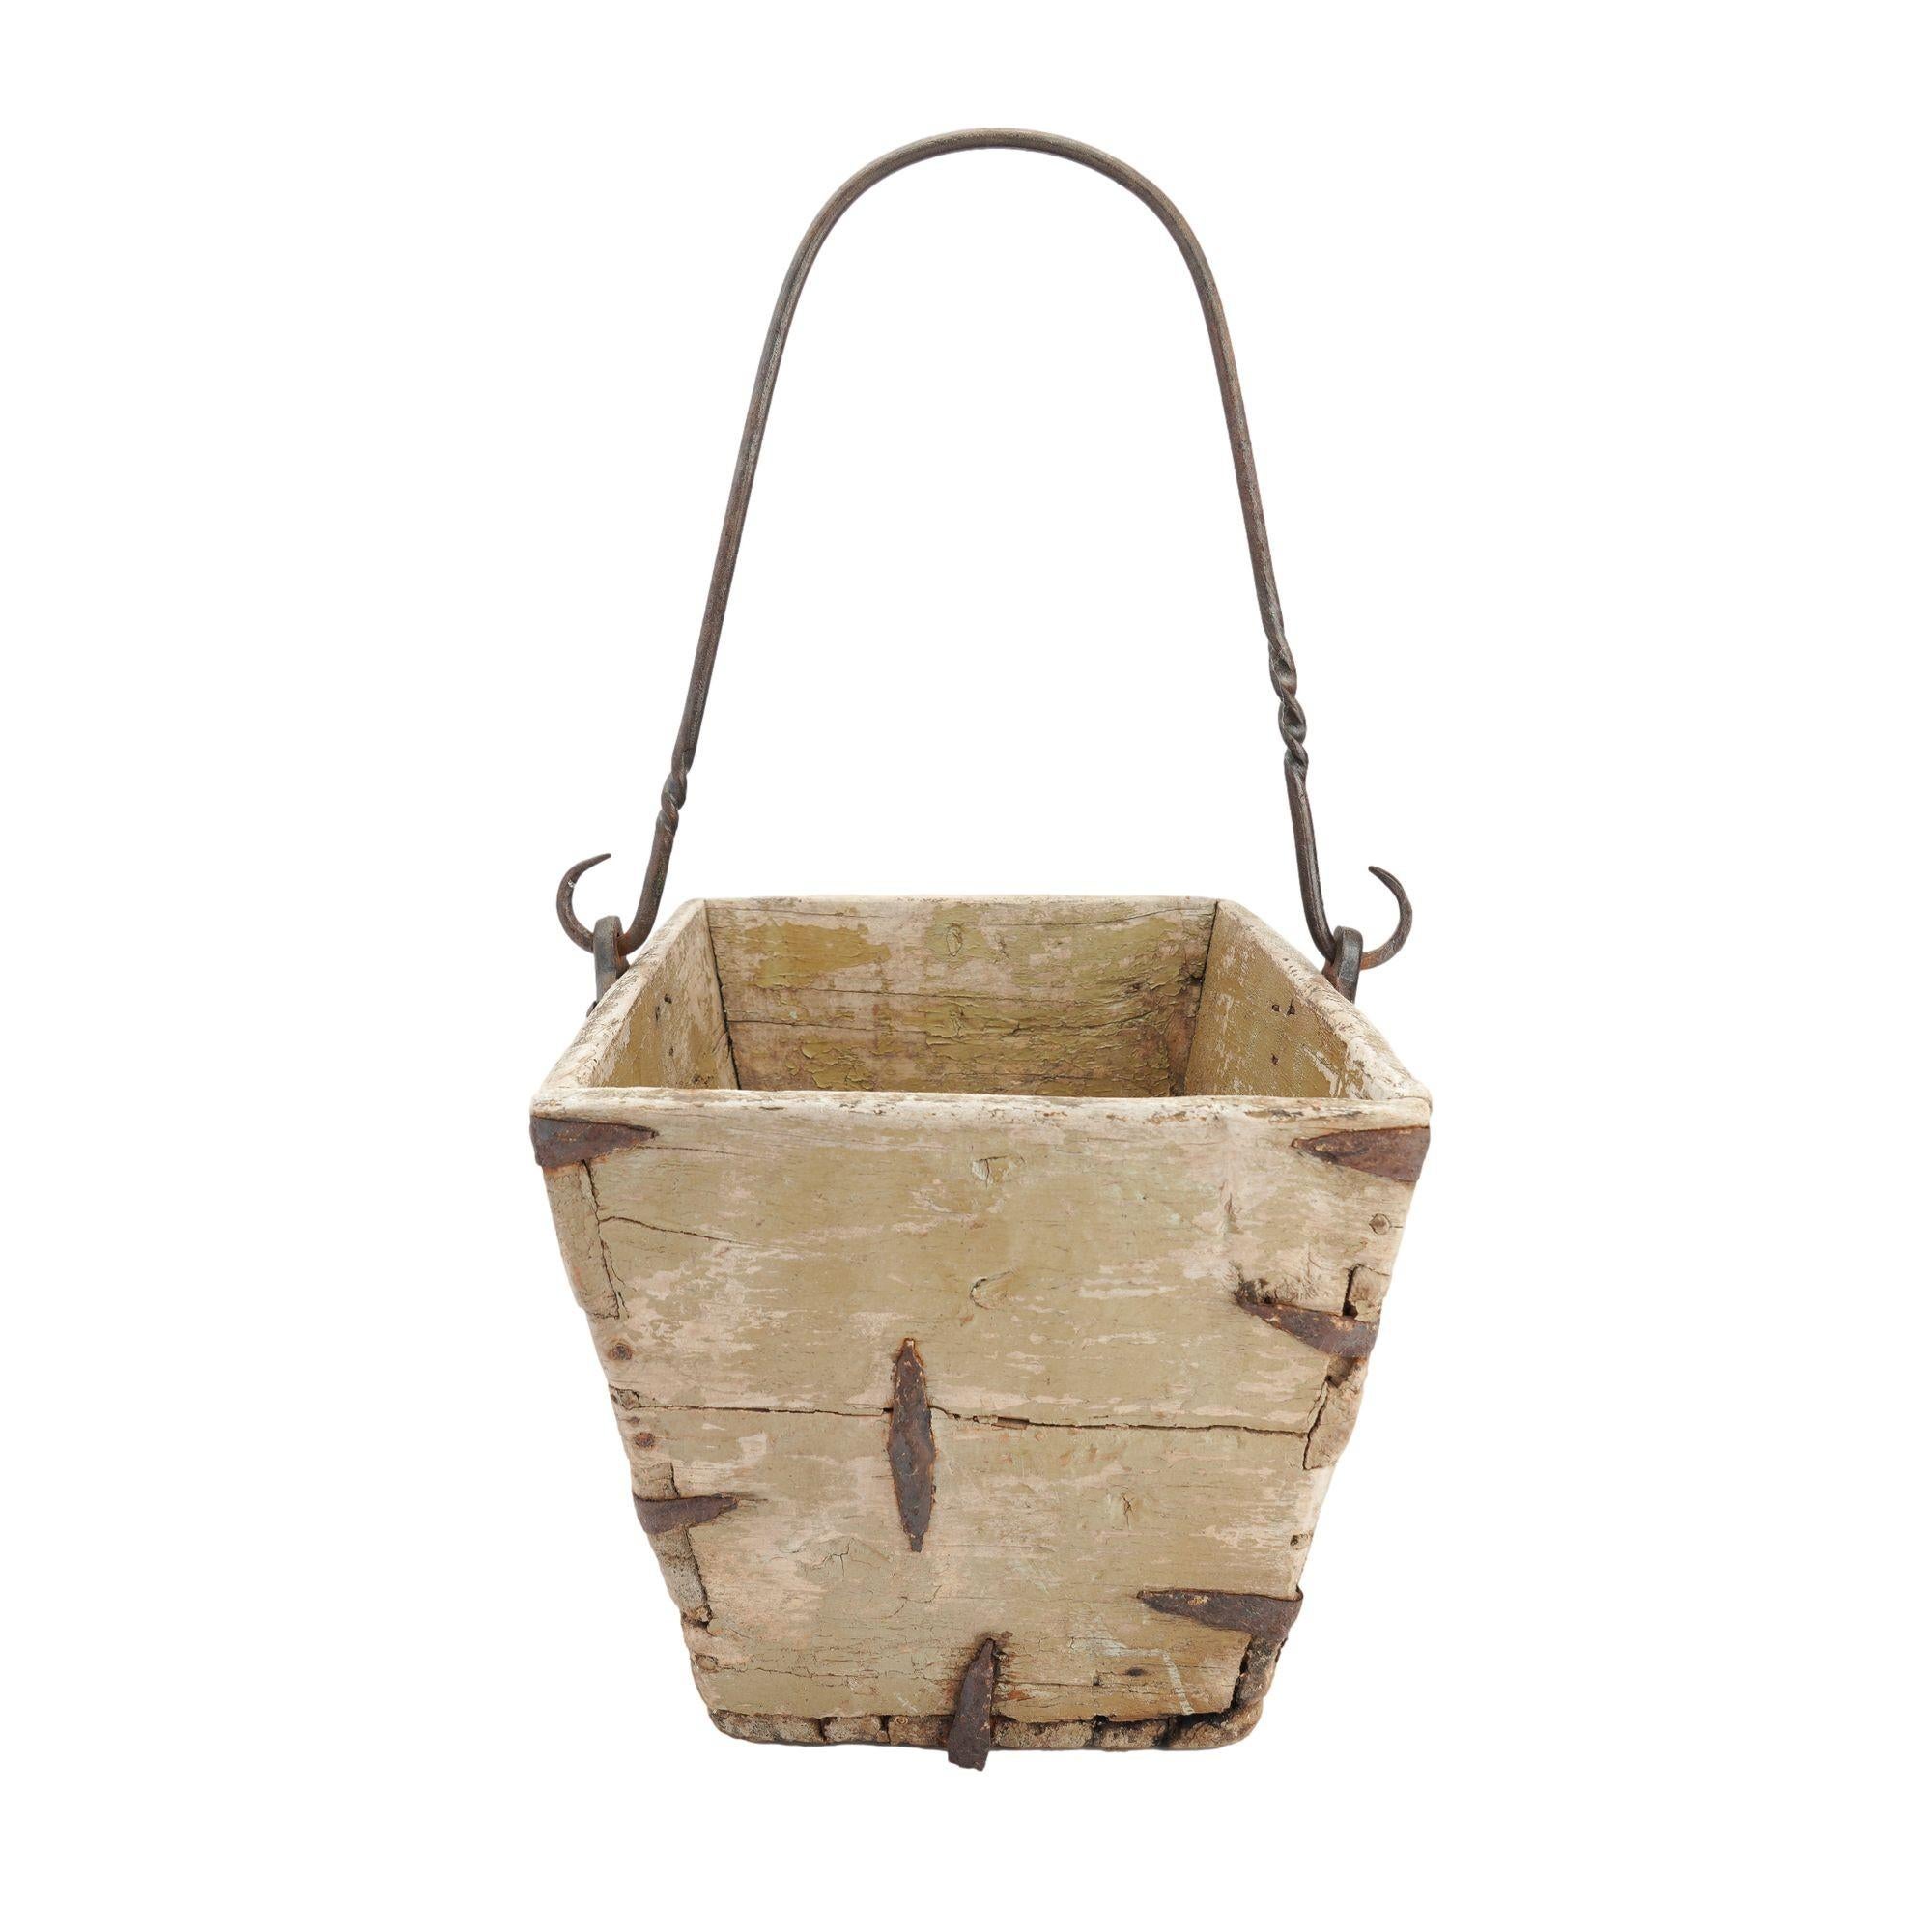 Handmade wood garden trug joined by dove tails and hand forged iron nails with peened iron reinforcements. The handle is hand forged iron with a rope twist element and hook for the iron keeper peened to the sides of the pail.

France,